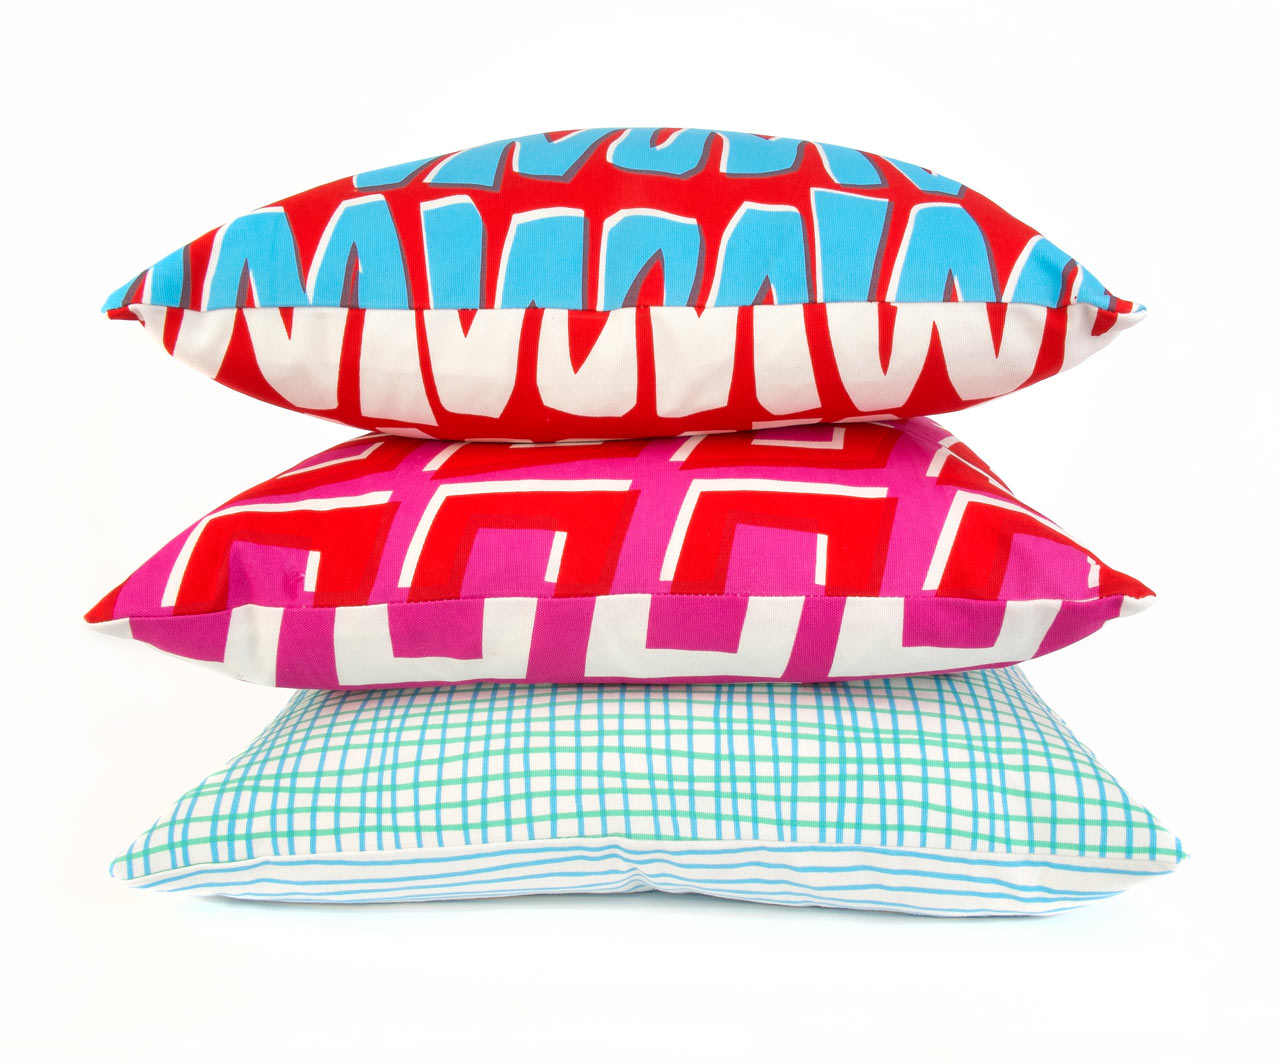 An Irresistible Collection of Hand-Printed Pillows